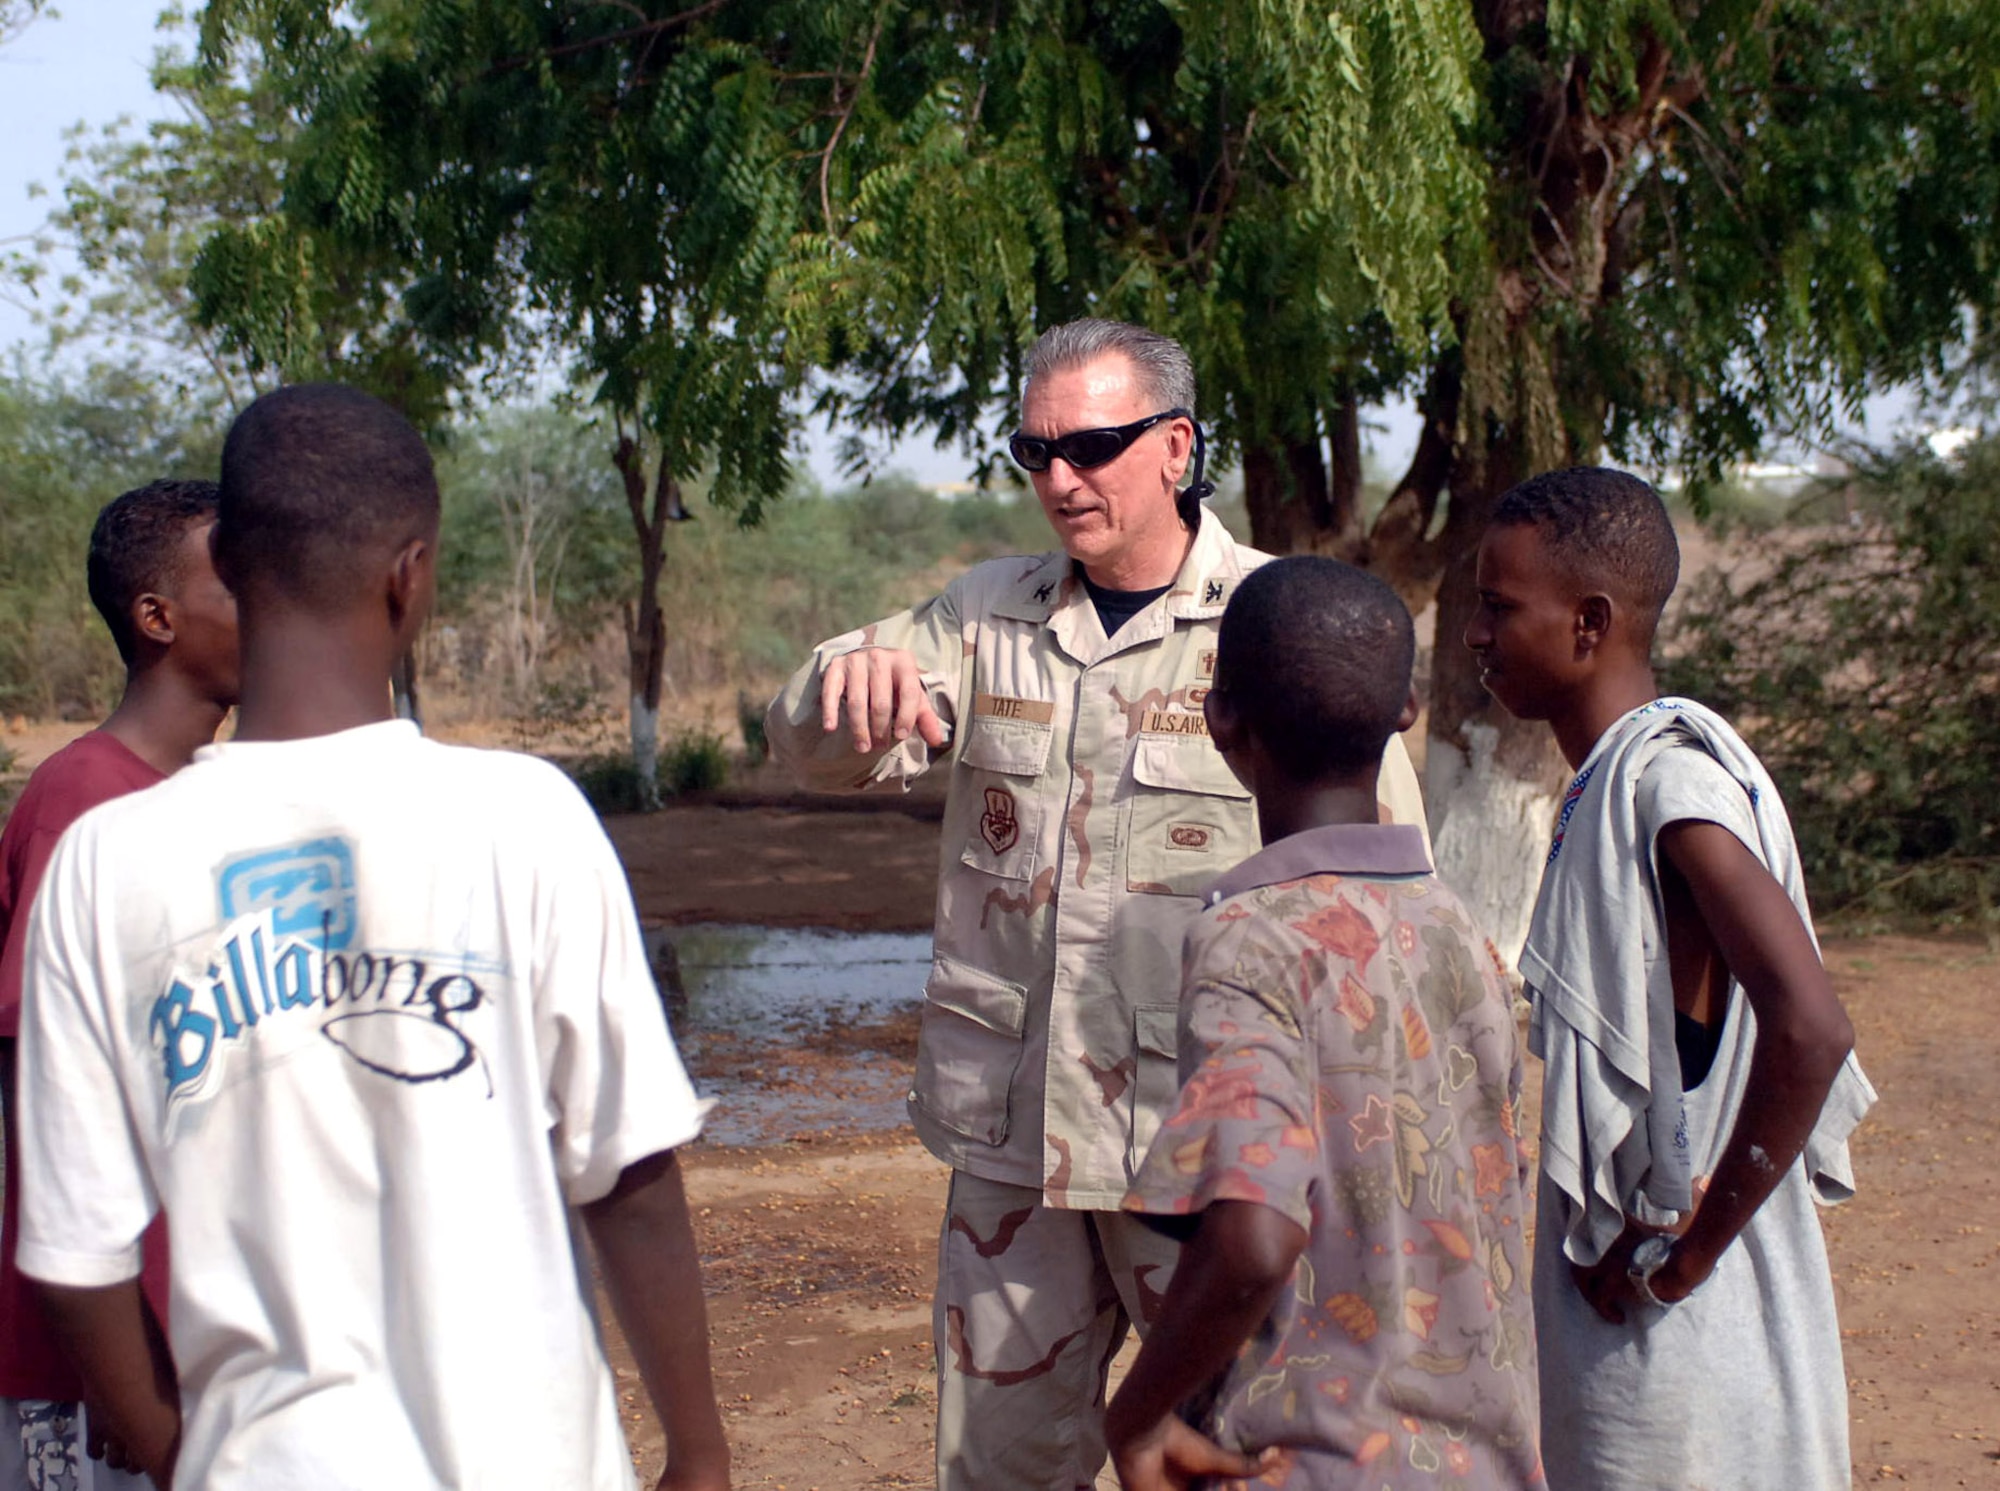 Chaplain (Col.) Gregory Tate talks with teenagers outside of the boys' orphanage July 13 near Camp Lemonier in Djibouti. Chaplain Tate, the U.S. Central Air Forces Command chaplain, visited Djibouti as part of his Central Command area of operation tour, observing Air Force chaplain services and religious support teams. (U.S. Navy photo/Petty Officer 1st Class John Osborne) 
